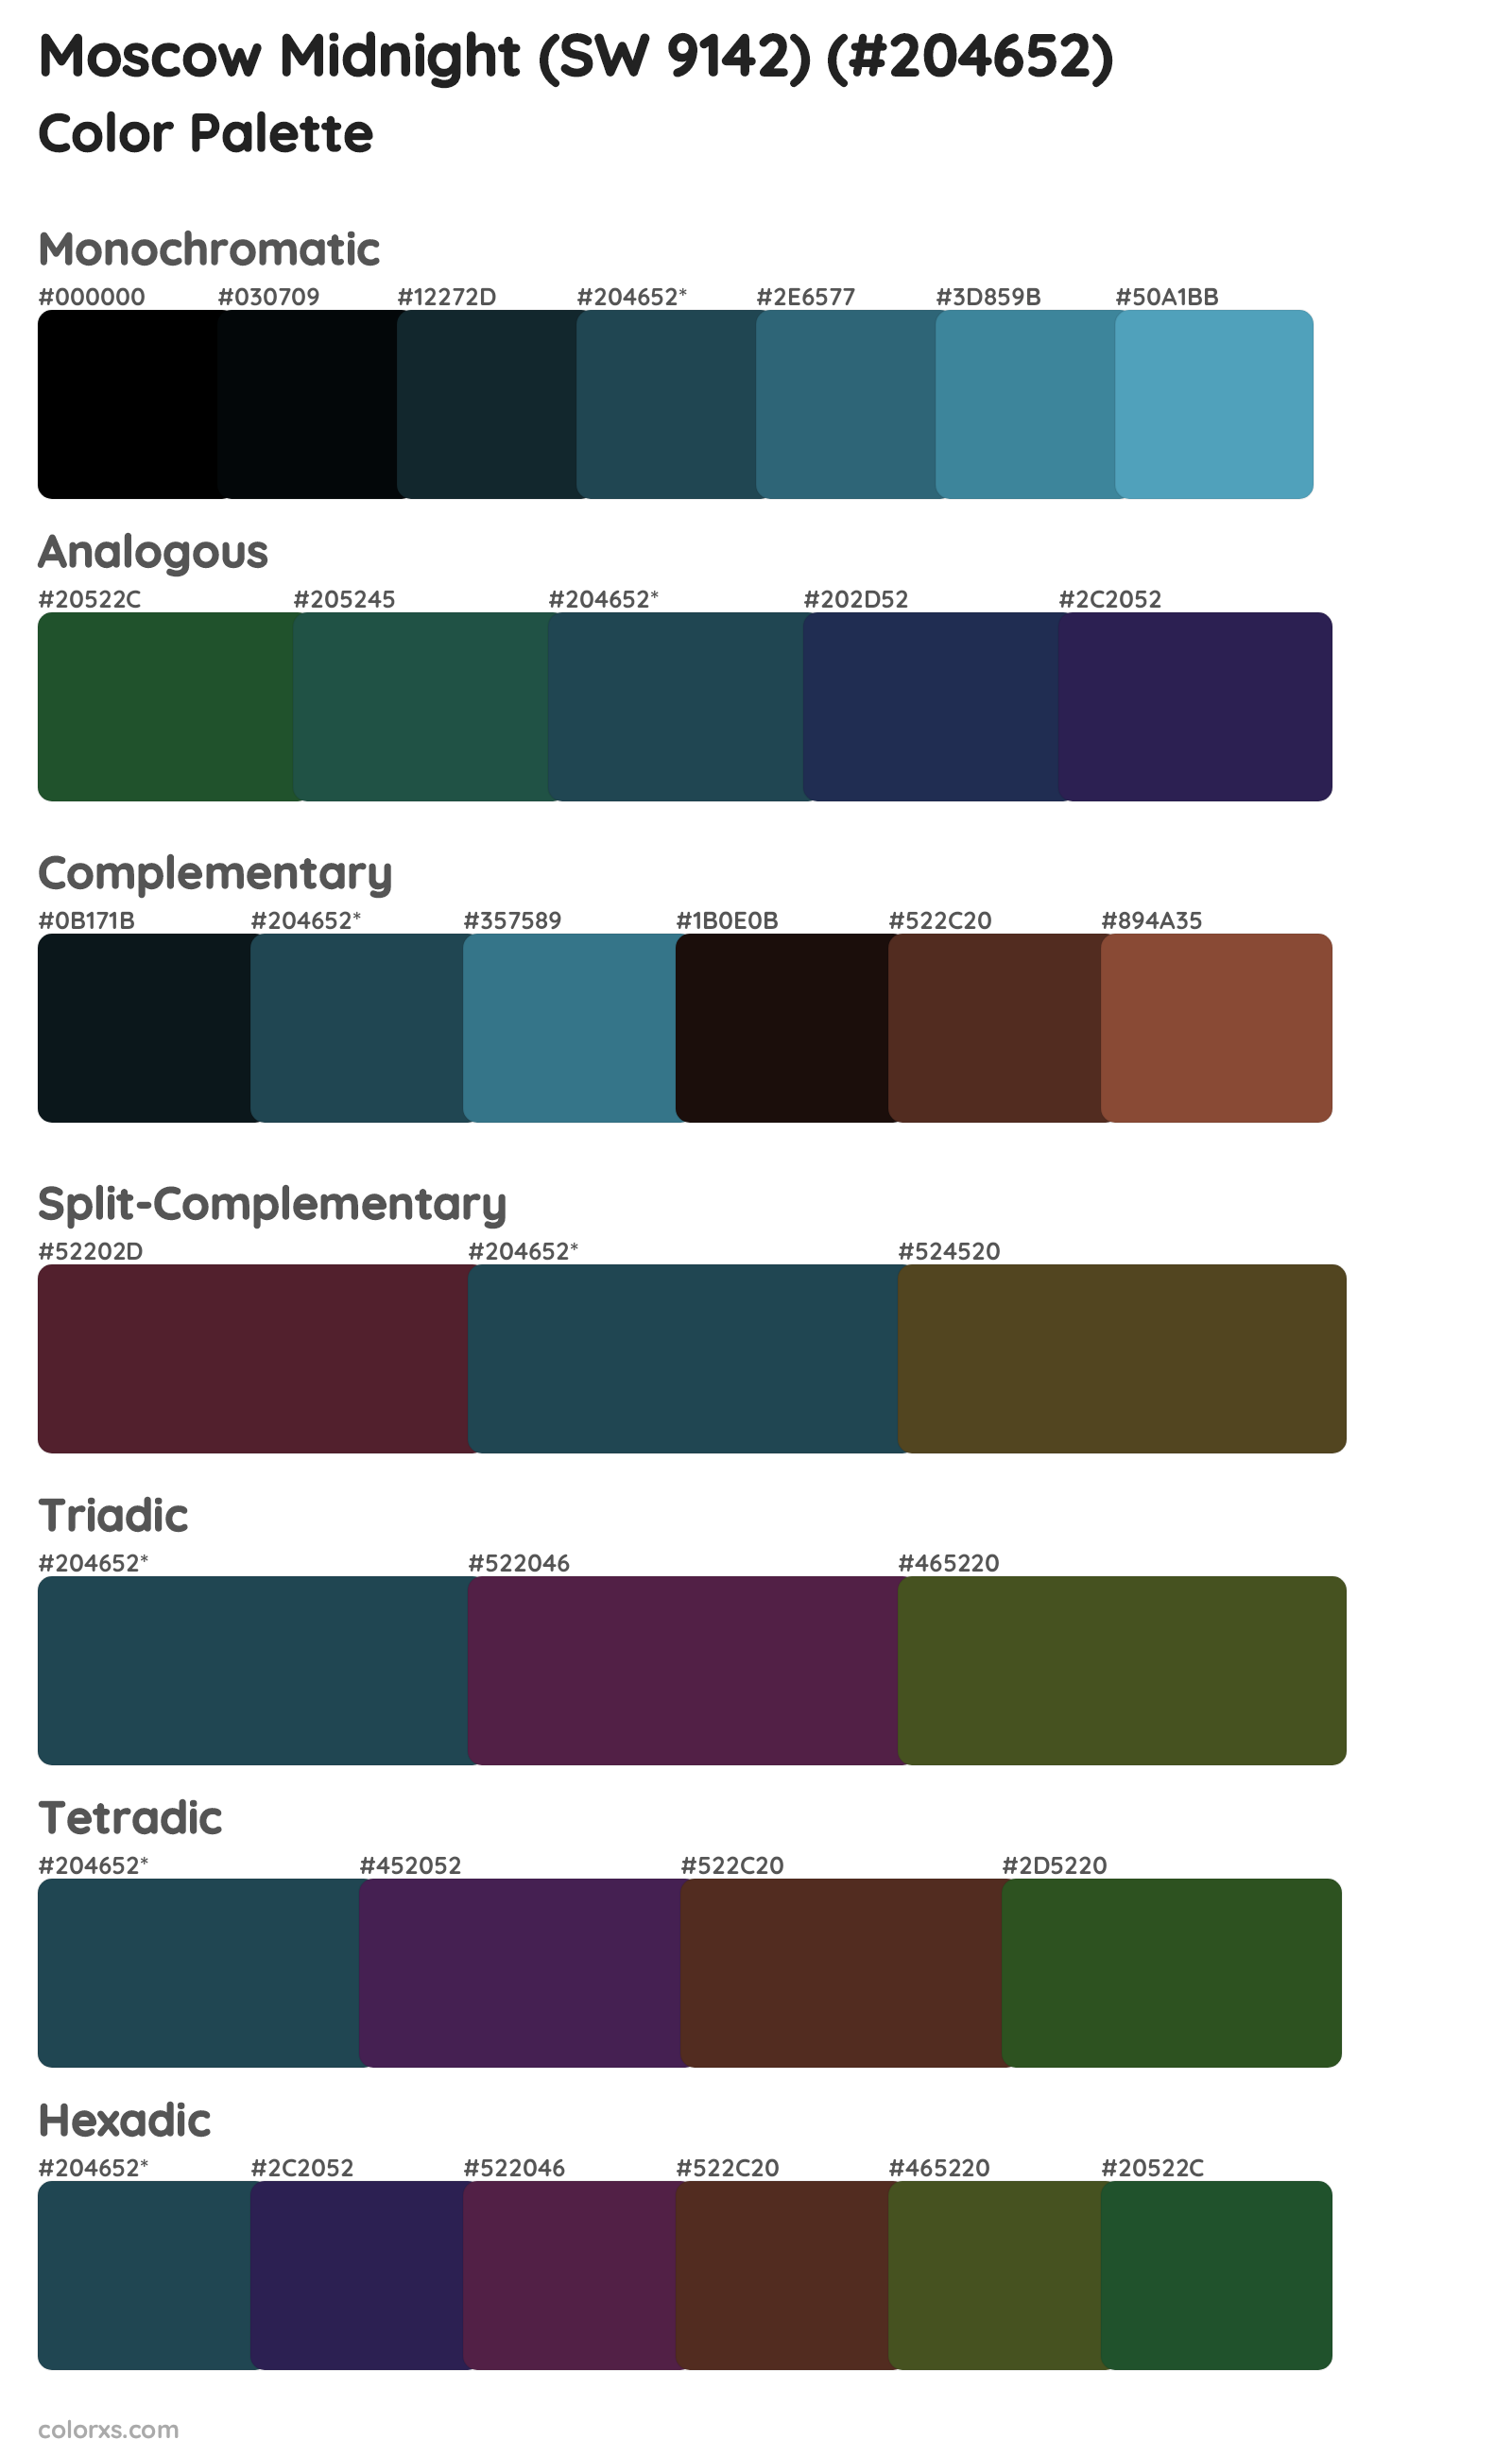 Moscow Midnight (SW 9142) Color Scheme Palettes